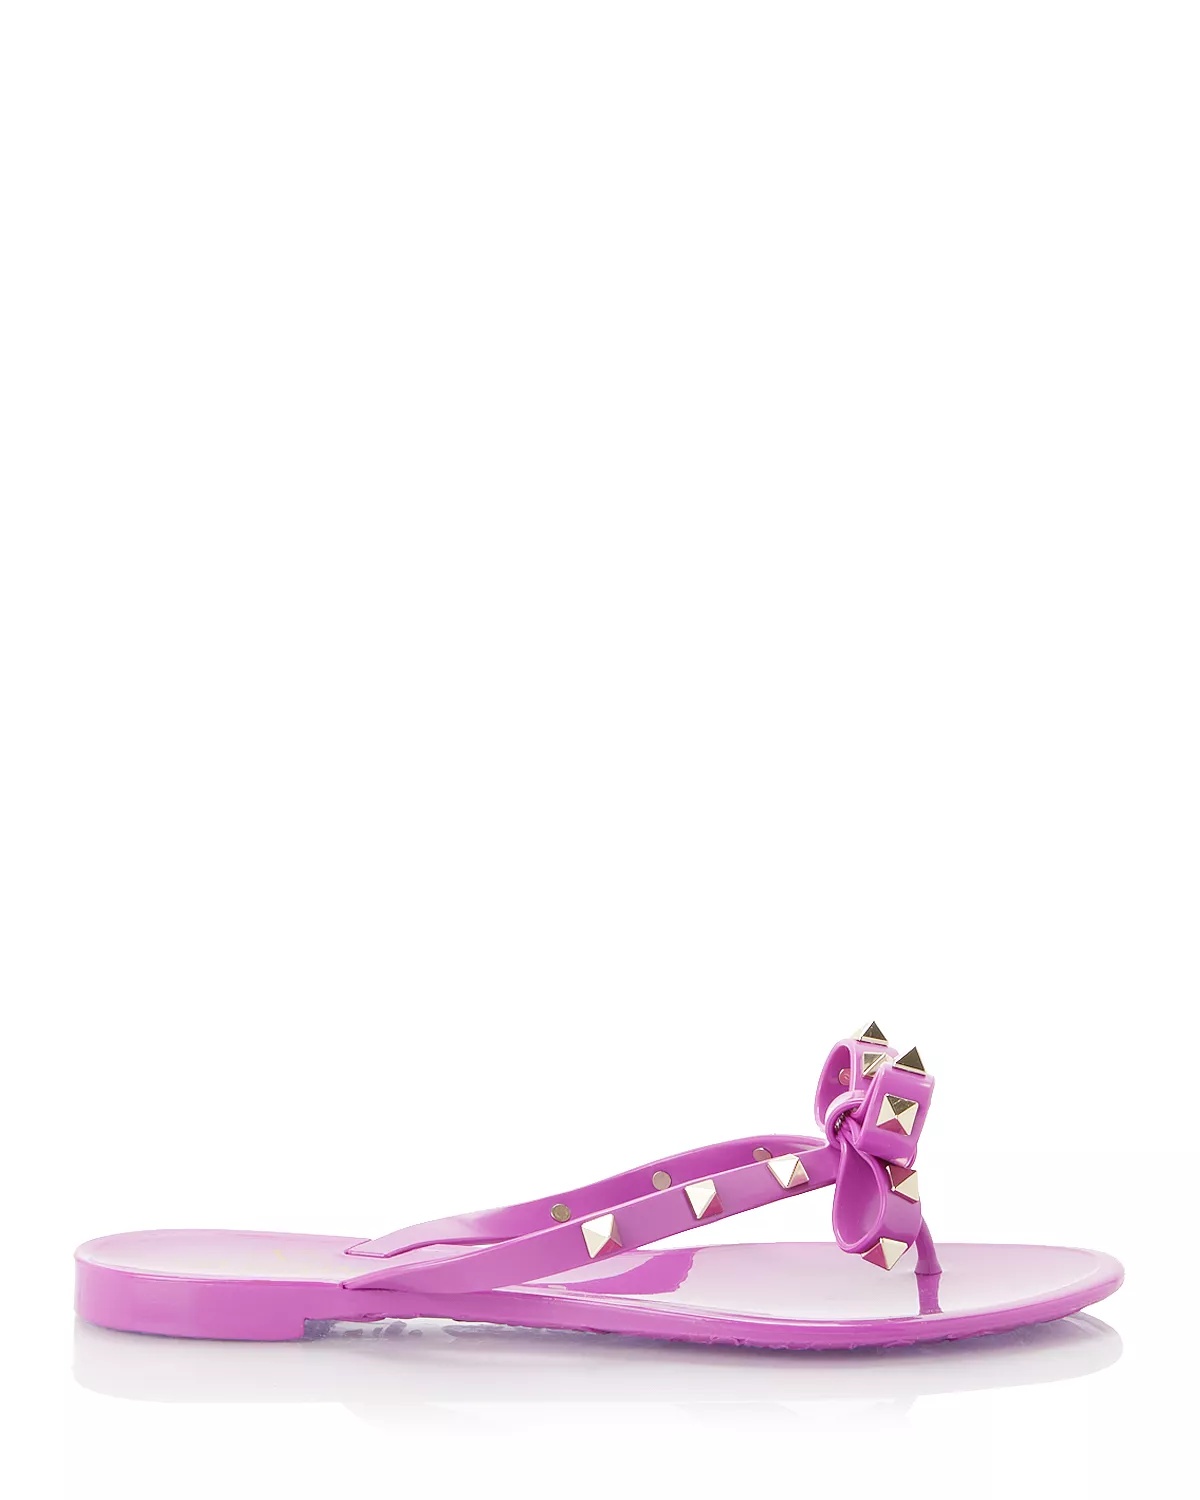 Women's Pyramid Studded Bow Thong Sandals - 3